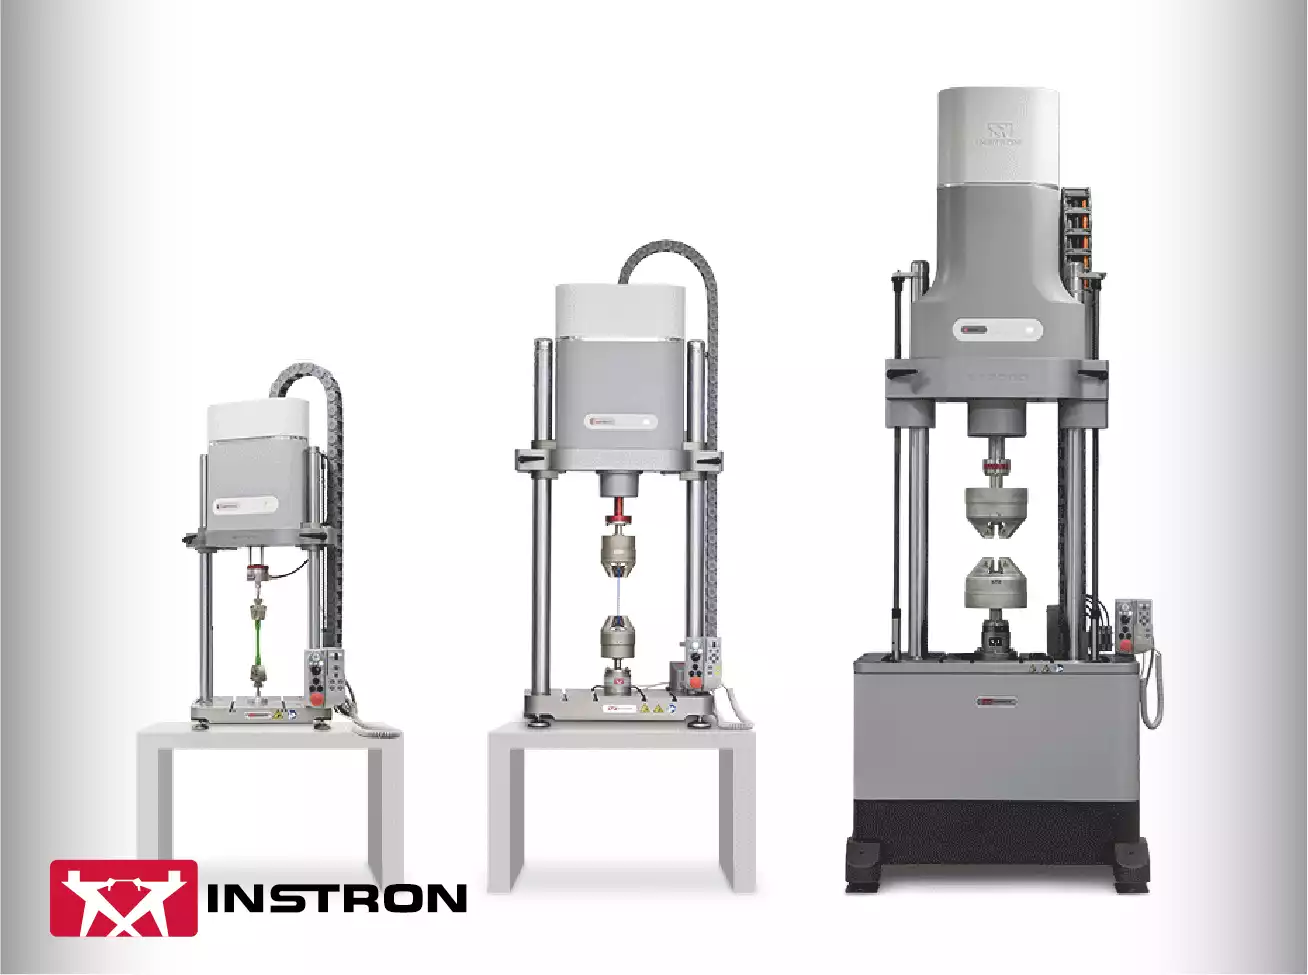 Instron ElectroPuls® All-Electric Dynamic and Fatigue Test Systems